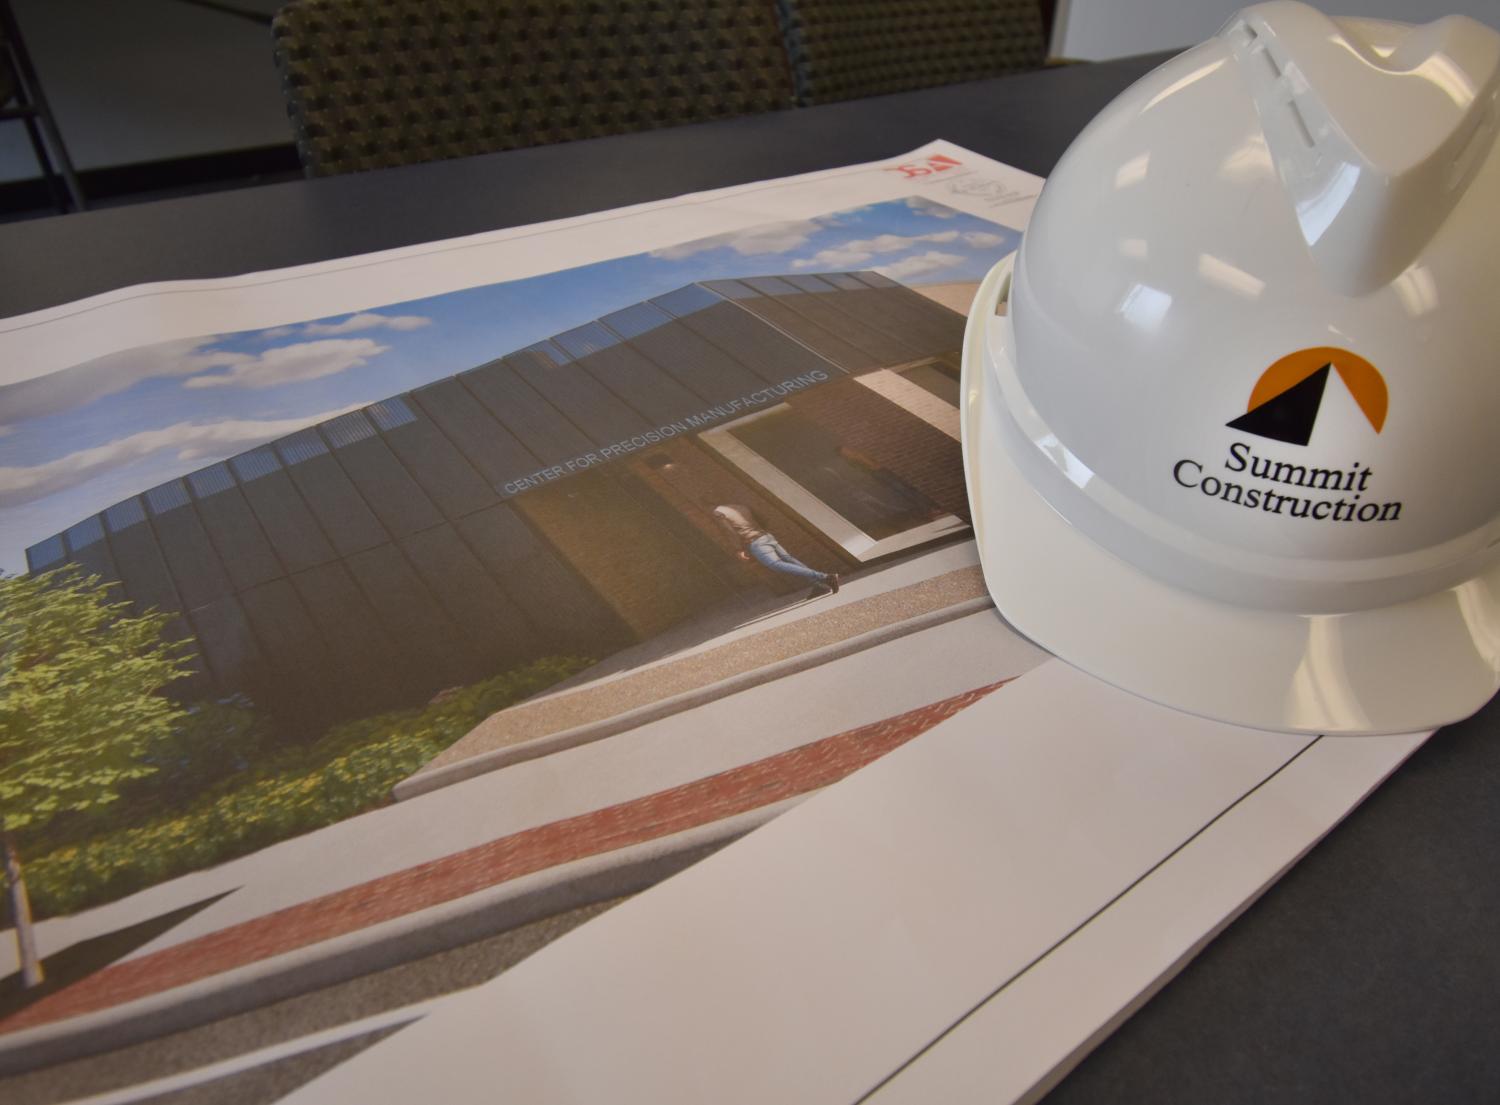 Summit Construction hard hat next to construction drawings 